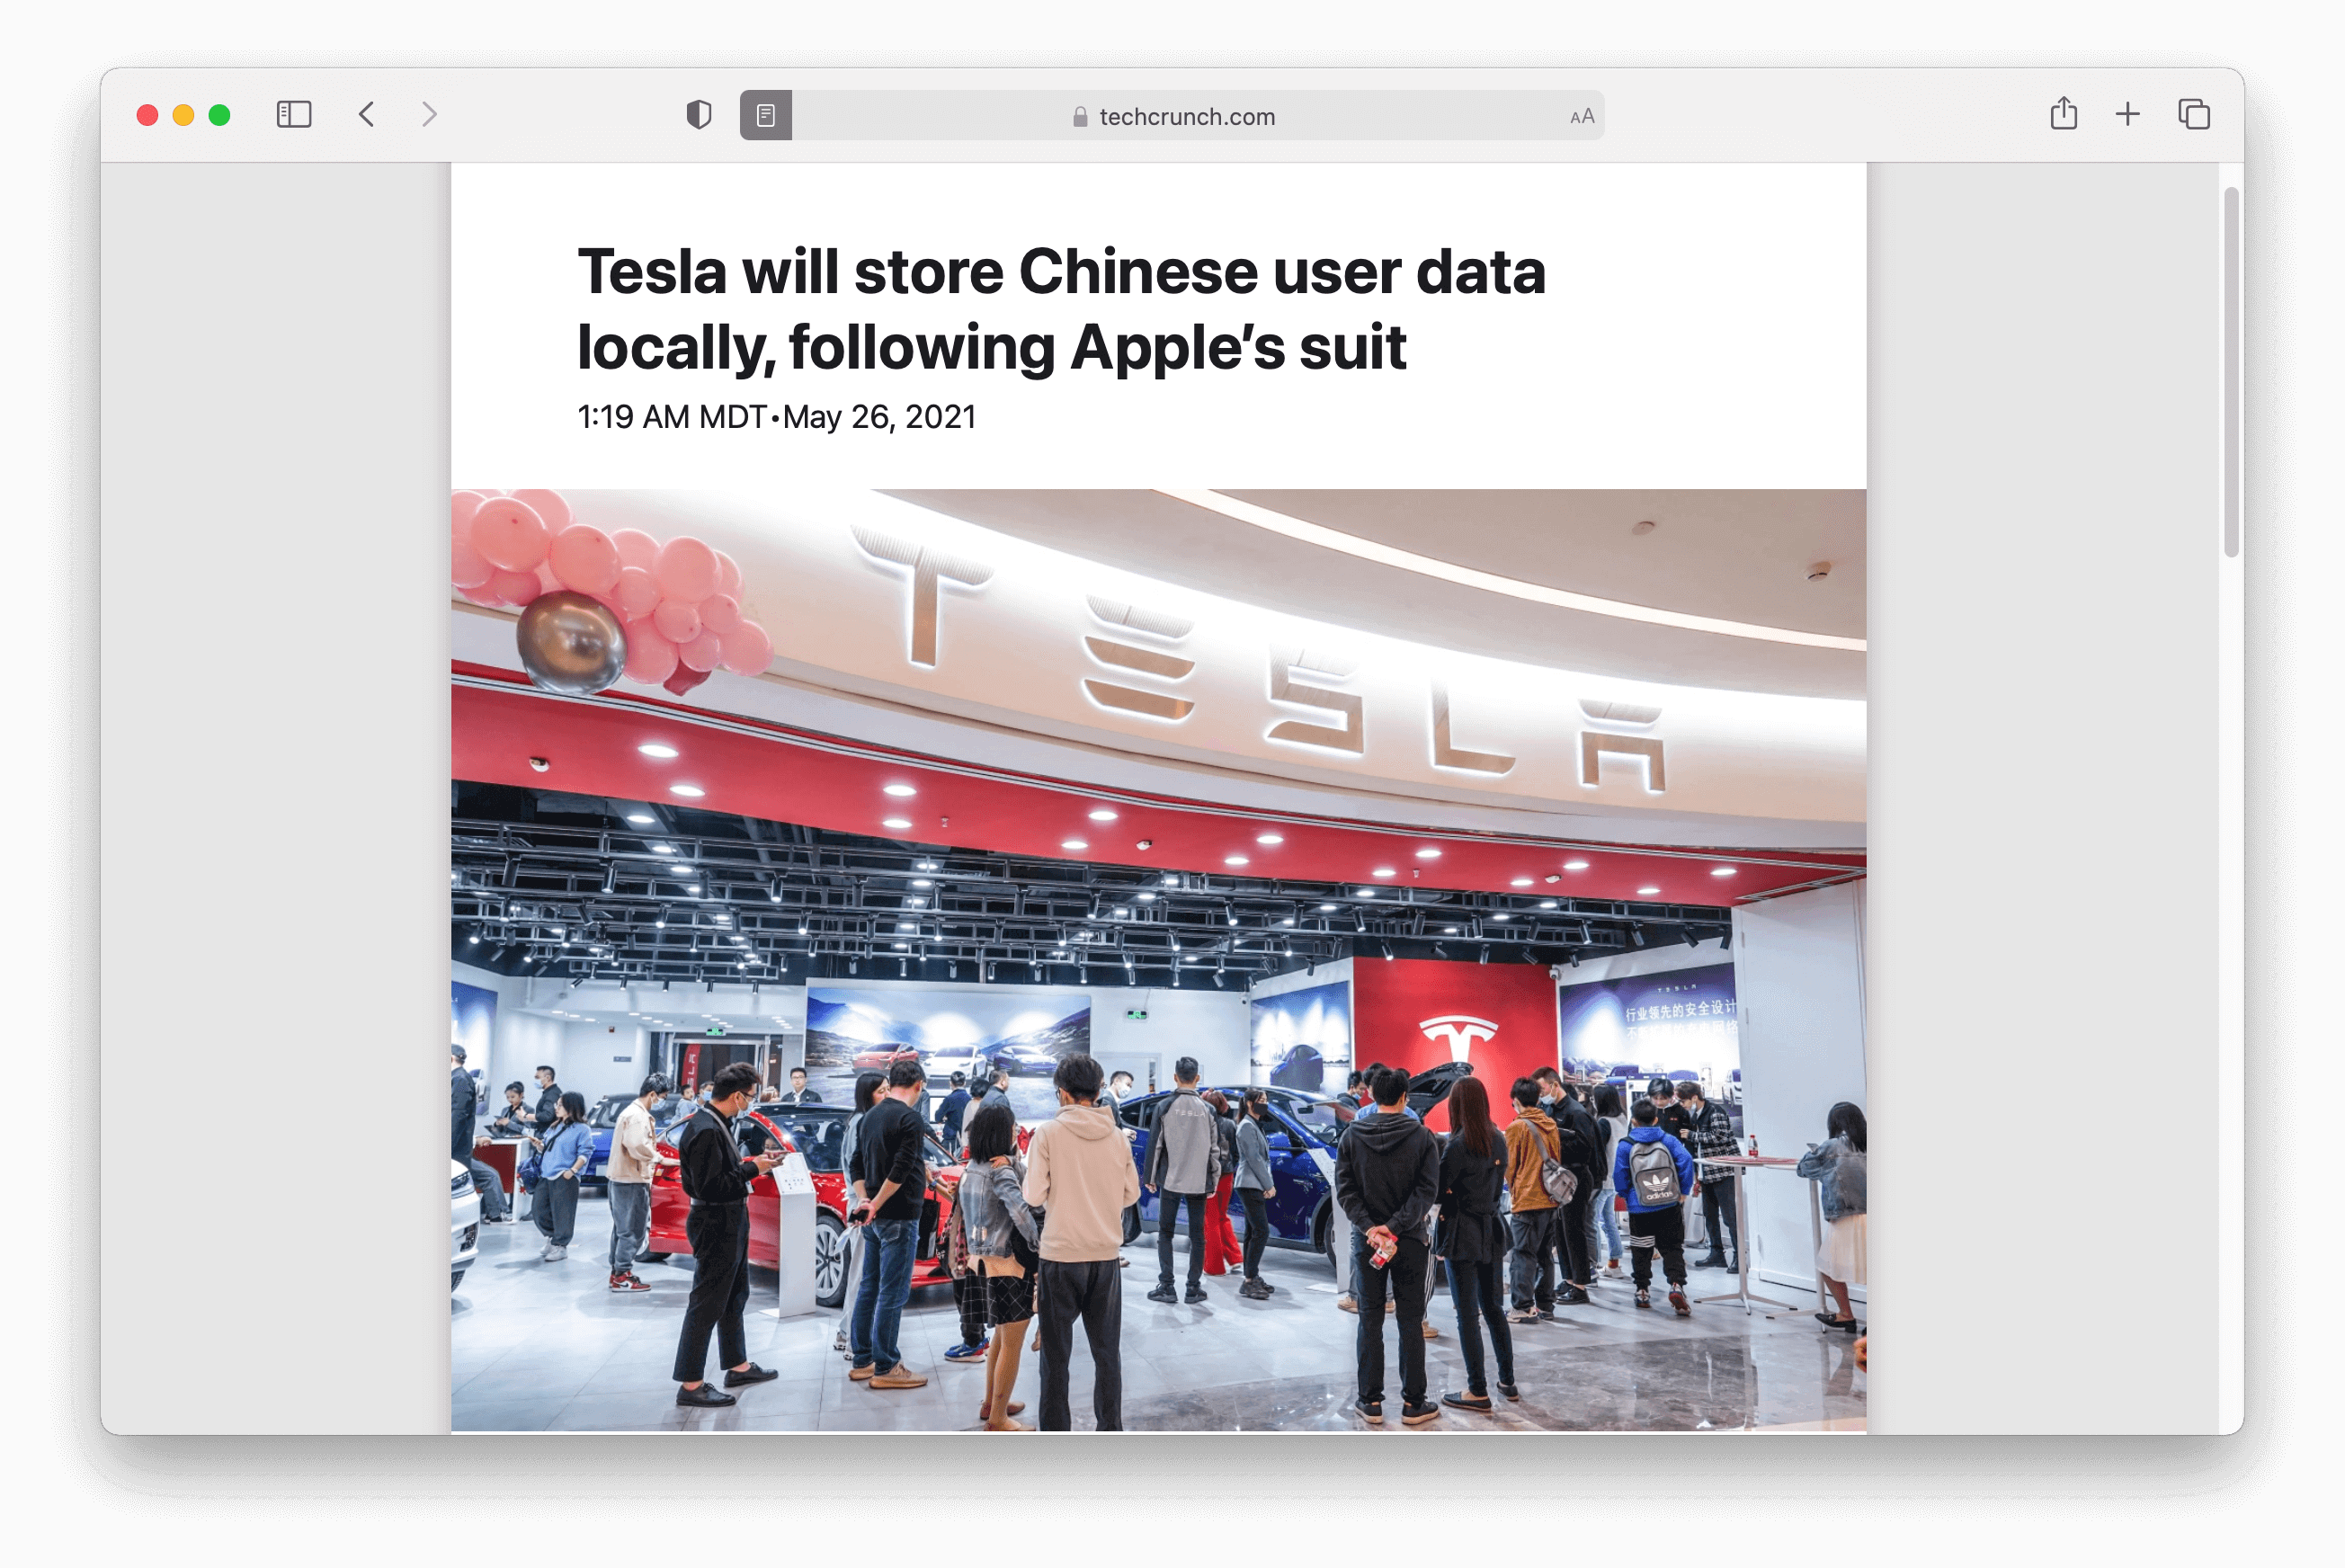 News Article on Tesla Data Storage in China